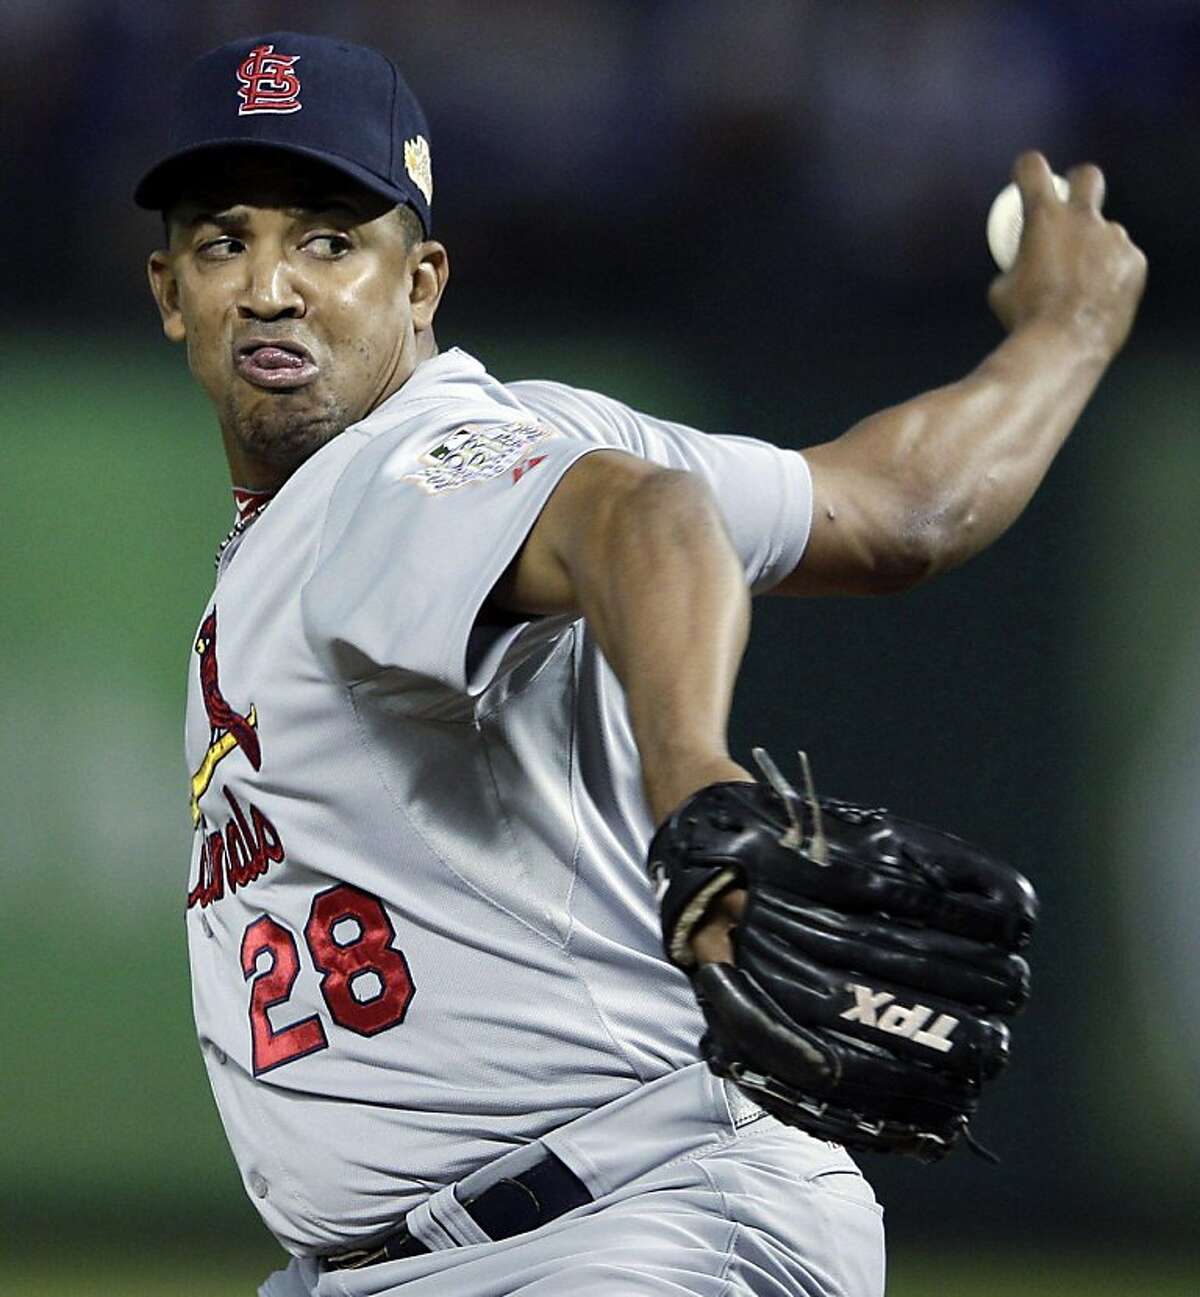 FILE - In this Oct. 24, 2011, file photo, St. Louis Cardinals relief pitcher Octavio Dotel throws during the eighth inning of Game 5 of baseball's World Series against the Texas Rangers in Arlington, Texas. Dotel is on the verge of an unusual record. He has reached an agreement with the Detroit Tigers on a one-year deal, with a team option for 2013. When he takes the mound for the Tigers next season, the reliever will be playing for a record 13th major league franchise. (AP Photo/Matt Slocum, FIle) Ran on: 12-10-2011 Photo caption Dummy text goes here. Dummy text goes here. Dummy text goes here. Dummy text goes here. Dummy text goes here. Dummy text goes here. Dummy text goes here. Dummy text goes here.###Photo: names10_PHdotel1319328000AP###Live Caption:FILE - In this Oct. 24, 2011, file photo, St. Louis Cardinals relief pitcher Octavio Dotel throws during the eighth inning of Game 5 of baseball's World Series against the Texas Rangers in Arlington, Texas. Dotel is on the verge of an unusual record. He has reached an agreement with the Detroit Tigers on a one-year deal, with a team option for 2013. When he takes the mound for the Tigers next season, the reliever will be playing for a record 13th major league franchise.###Caption History:FILE - In this Oct. 24, 2011, file photo, St. Louis Cardinals relief pitcher Octavio Dotel throws during the eighth inning of Game 5 of baseball's World Series against the Texas Rangers in Arlington, Texas. Dotel is on the verge of an unusual record. He has reached an agreement with the Detroit Tigers on a one-year deal, with a team option for 2013. When he takes the mound for the Tigers next season, the reliever will be playing for a record 13th major league franchise. (AP Photo-Matt Slocum, FIle)###Notes:###Special Instructions:AN OCT. 24, 2011 FILE PHOTO